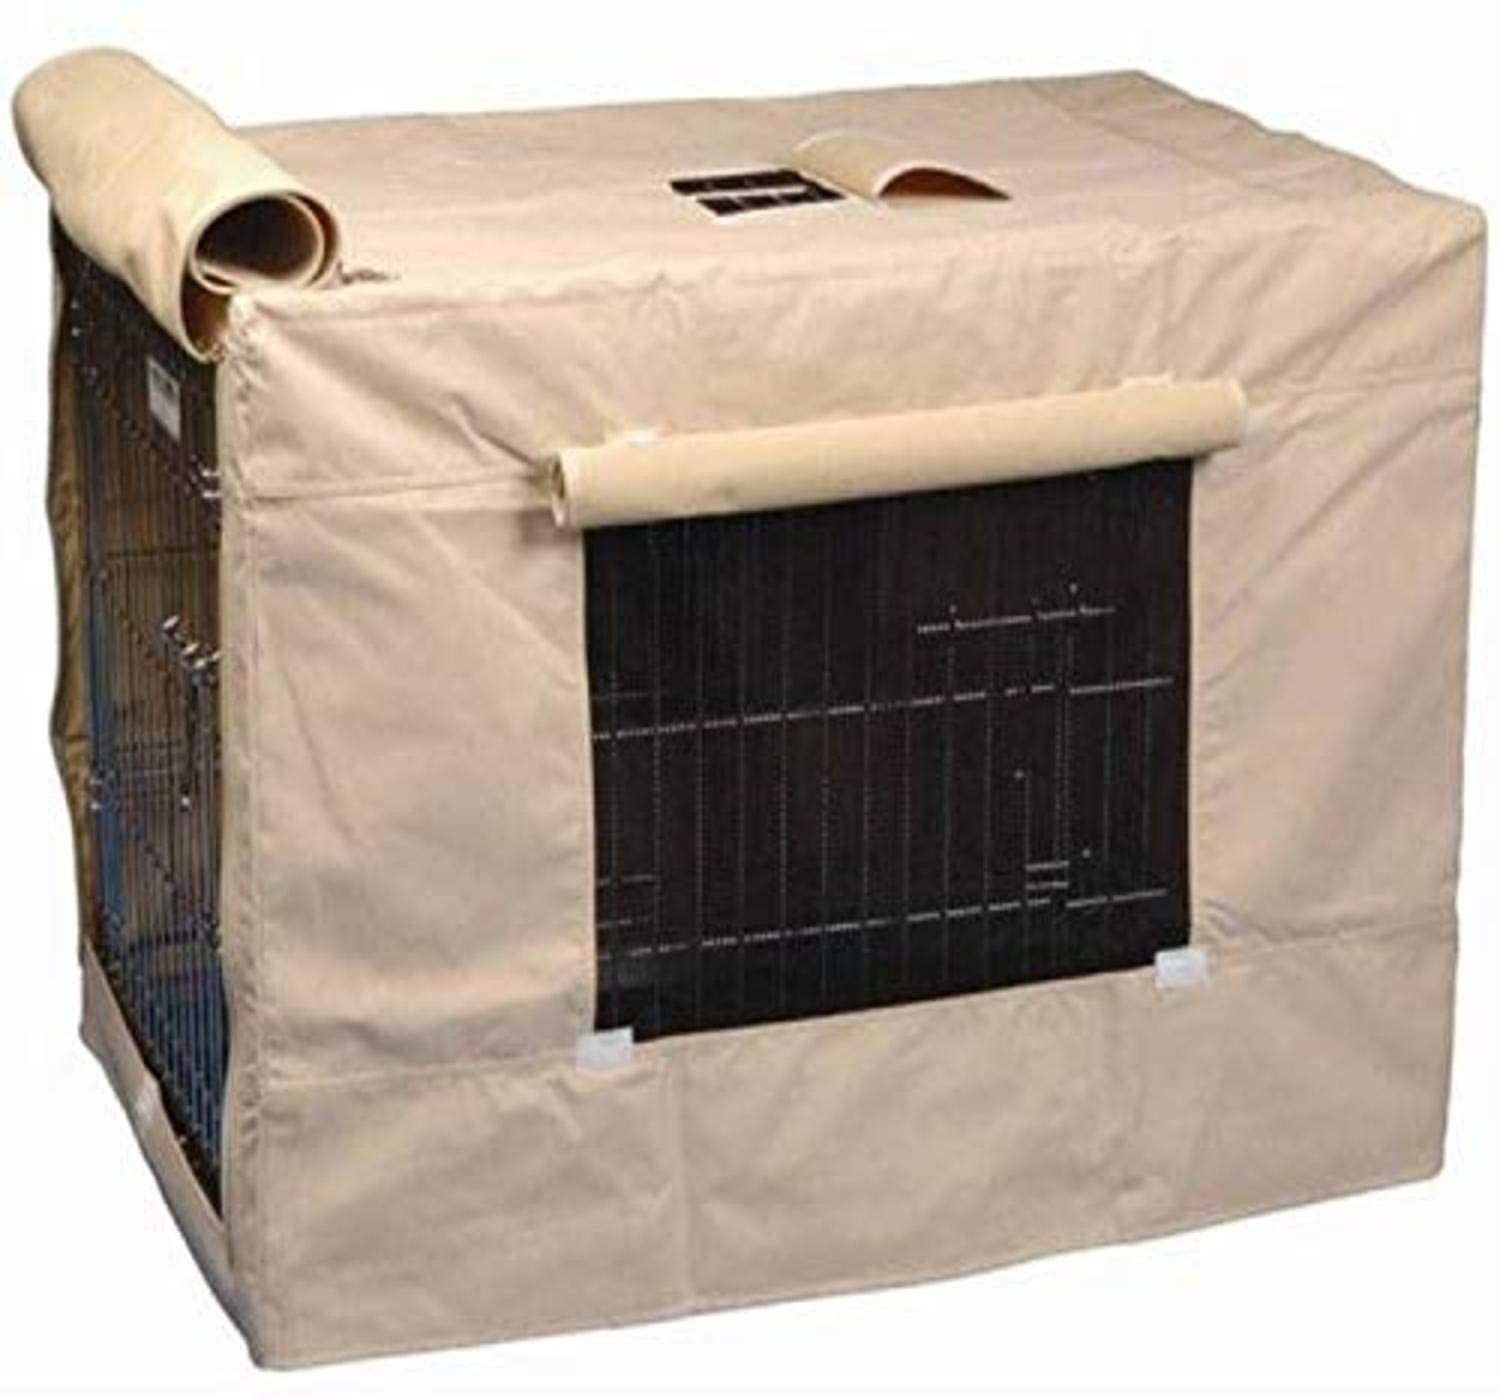 Dog crate kennel cover